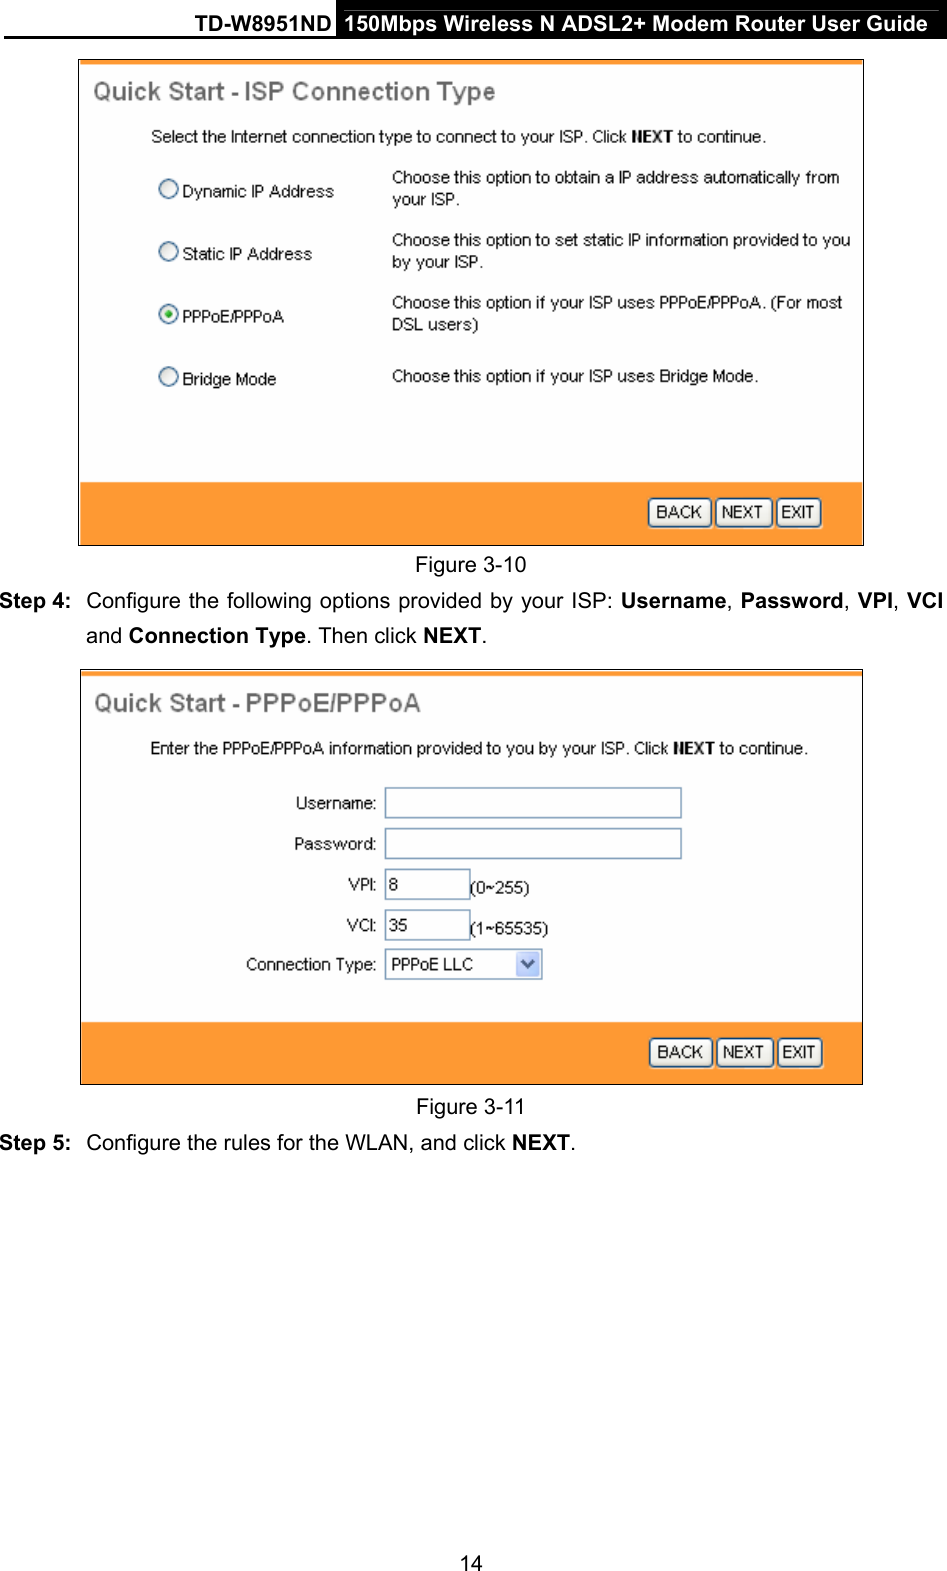 TD-W8951ND  150Mbps Wireless N ADSL2+ Modem Router User Guide  Figure 3-10 Step 4:  Configure the following options provided by your ISP: Username, Password, VPI, VCI and Connection Type. Then click NEXT.  Figure 3-11 Step 5:  Configure the rules for the WLAN, and click NEXT. 14 